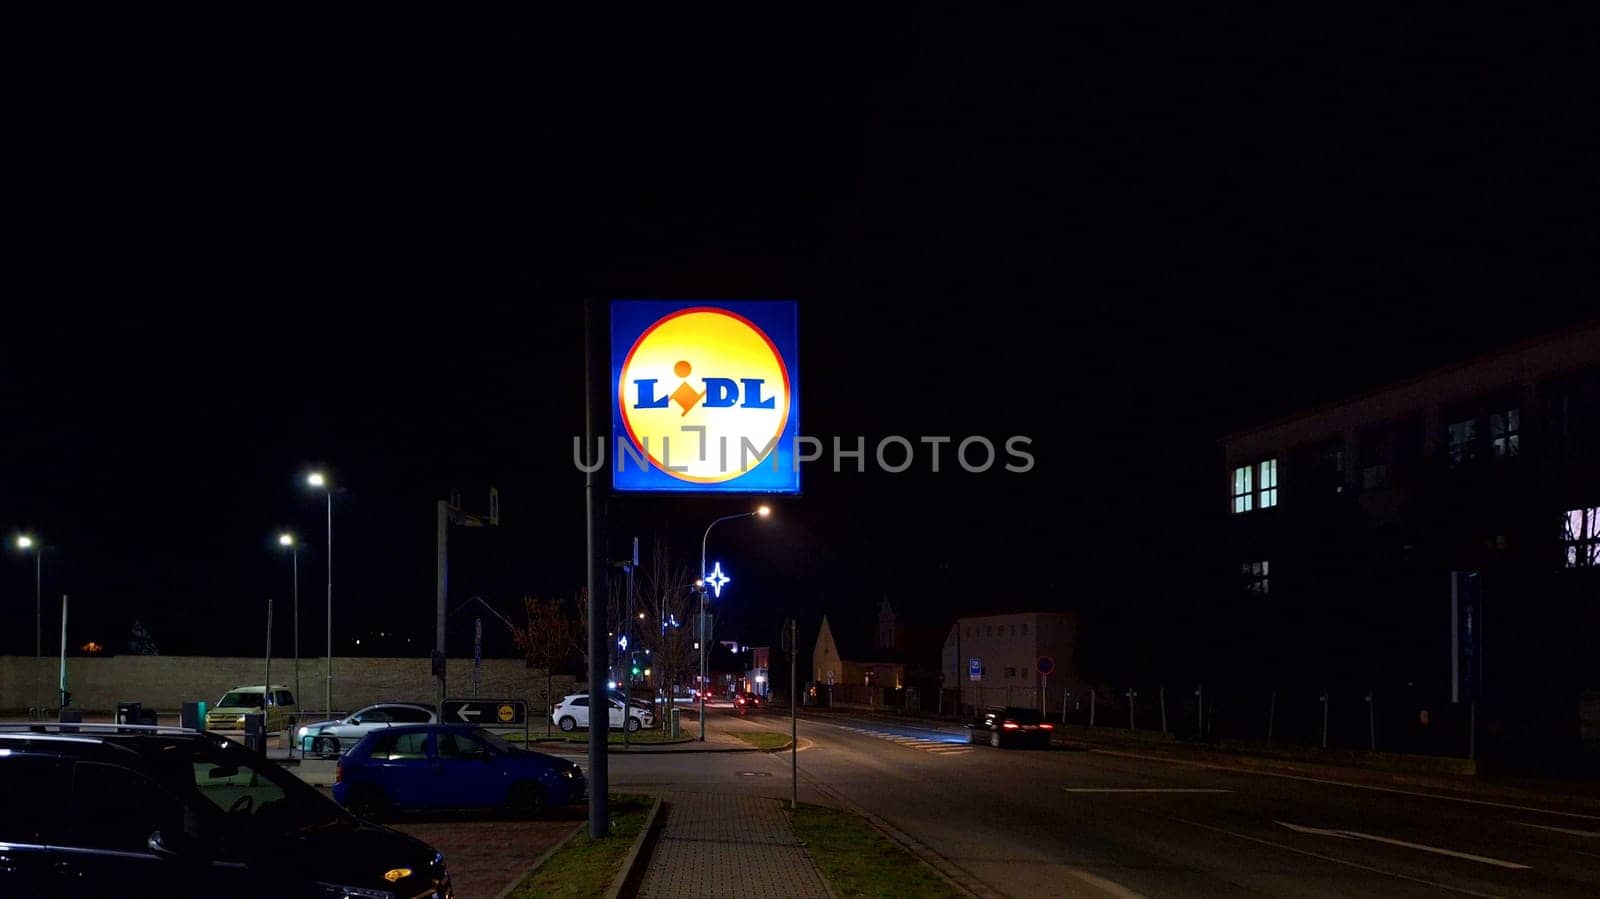 HUSTOPECE, CZECH REPUBLIC - DECEMBER 17, 2023: LIDL logo on hypermarket from German chain, part of Schwartz Gruppe which also owns Kaufland. Lidl is a German international discount retailer chain that operates over 12,000 stores, present in every member state of the European Union, Serbia, Switzerland, the United Kingdom and the United States.